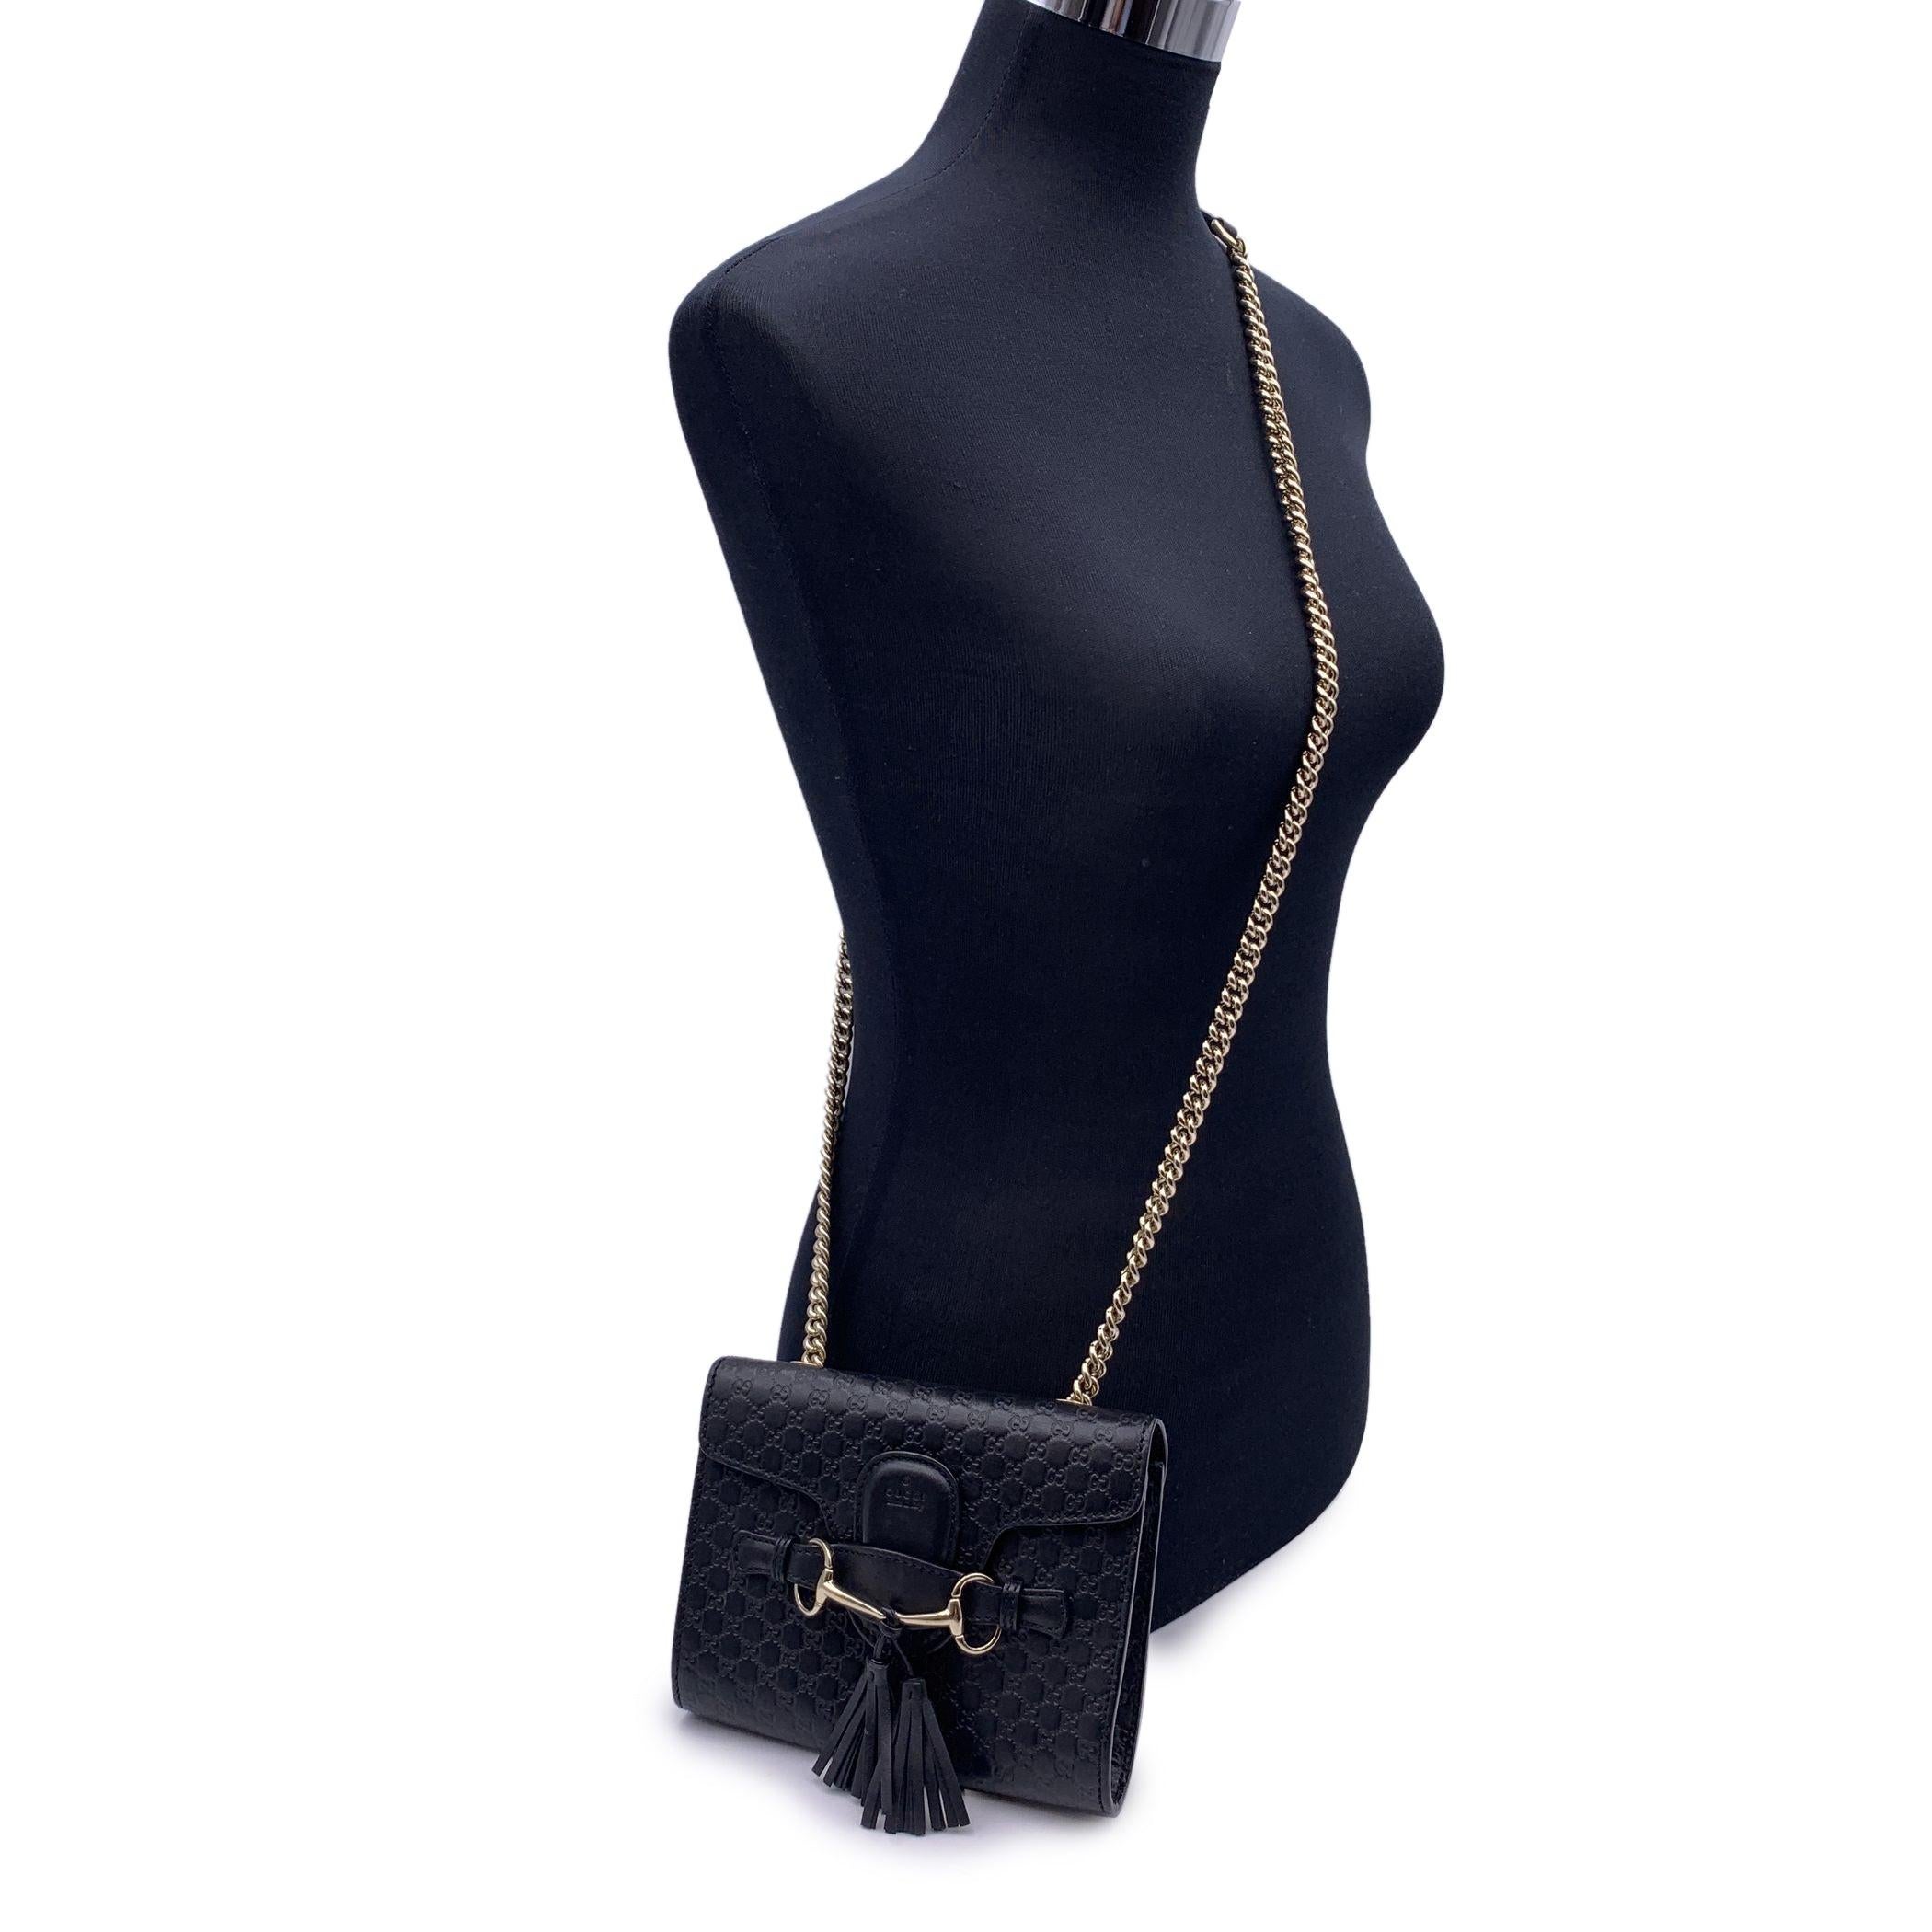 Black Microguccissima leather Gucci 'Emily' Chain shoulder bag. Light gold metal hardware. Chain-link shoulder strap. Horsebit & Tassels detail at front. Canvas interior lining. 1 slit pocket inside. Fold-in flap closure at front. 'GUCCI - Made in